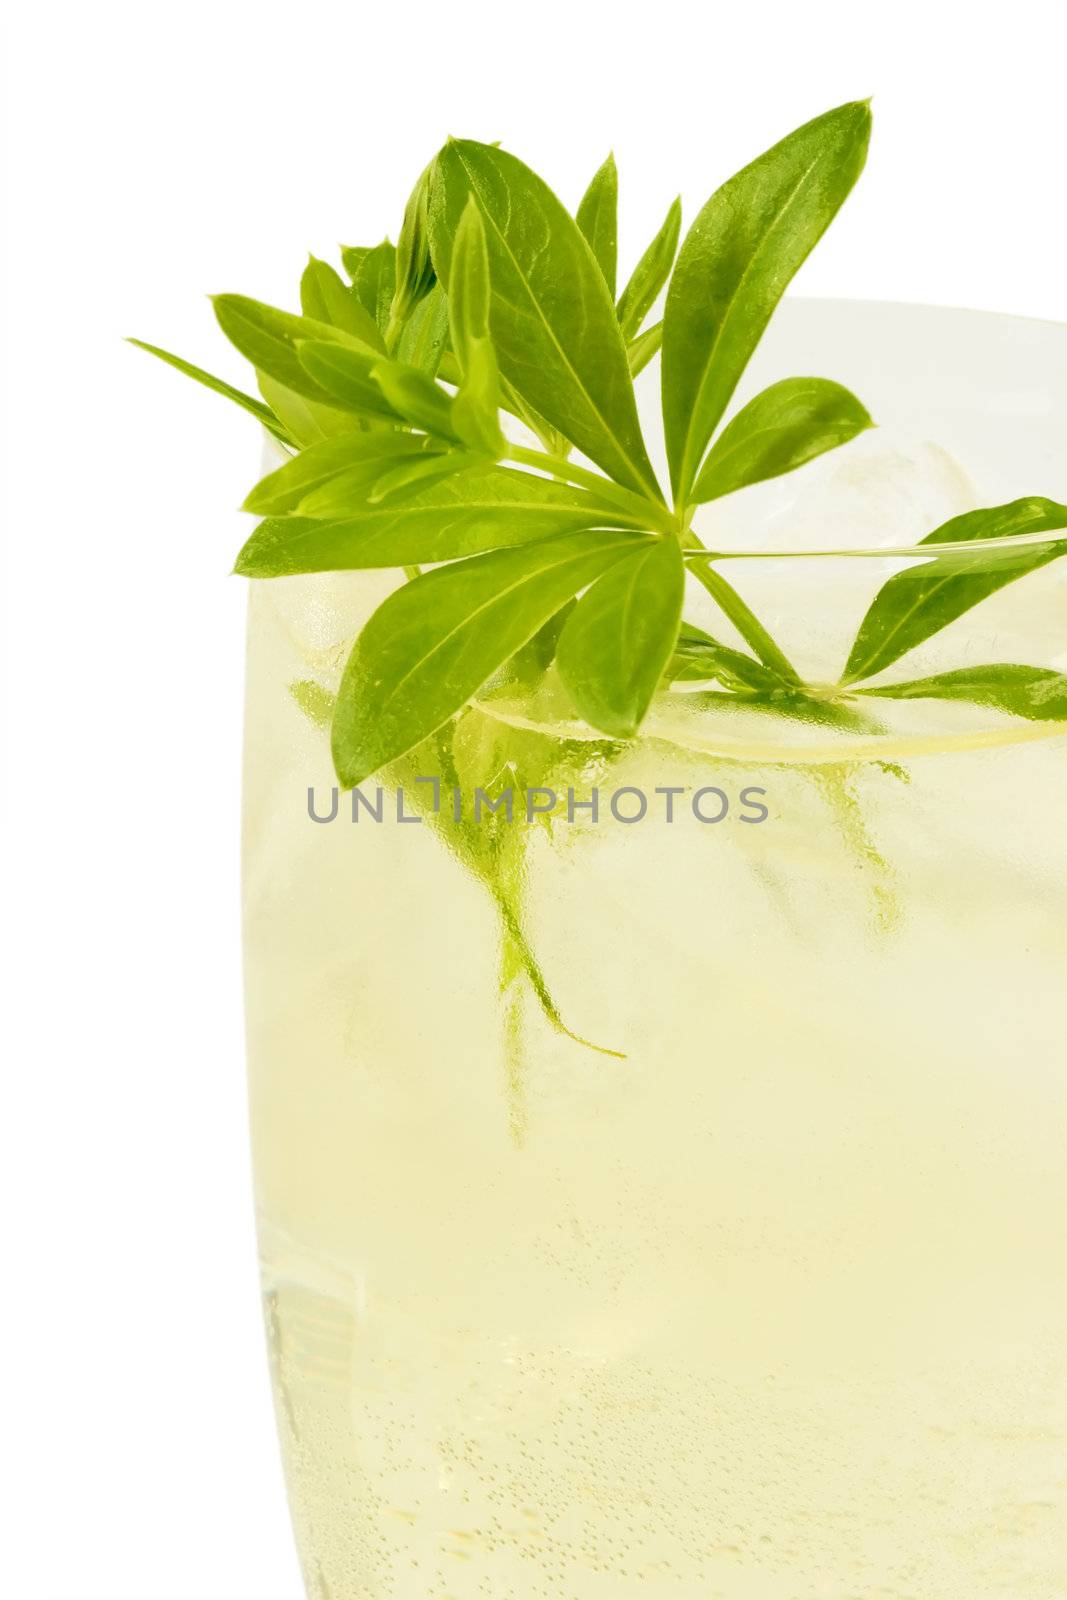 Punch with sweet woodruff herbs on bright background